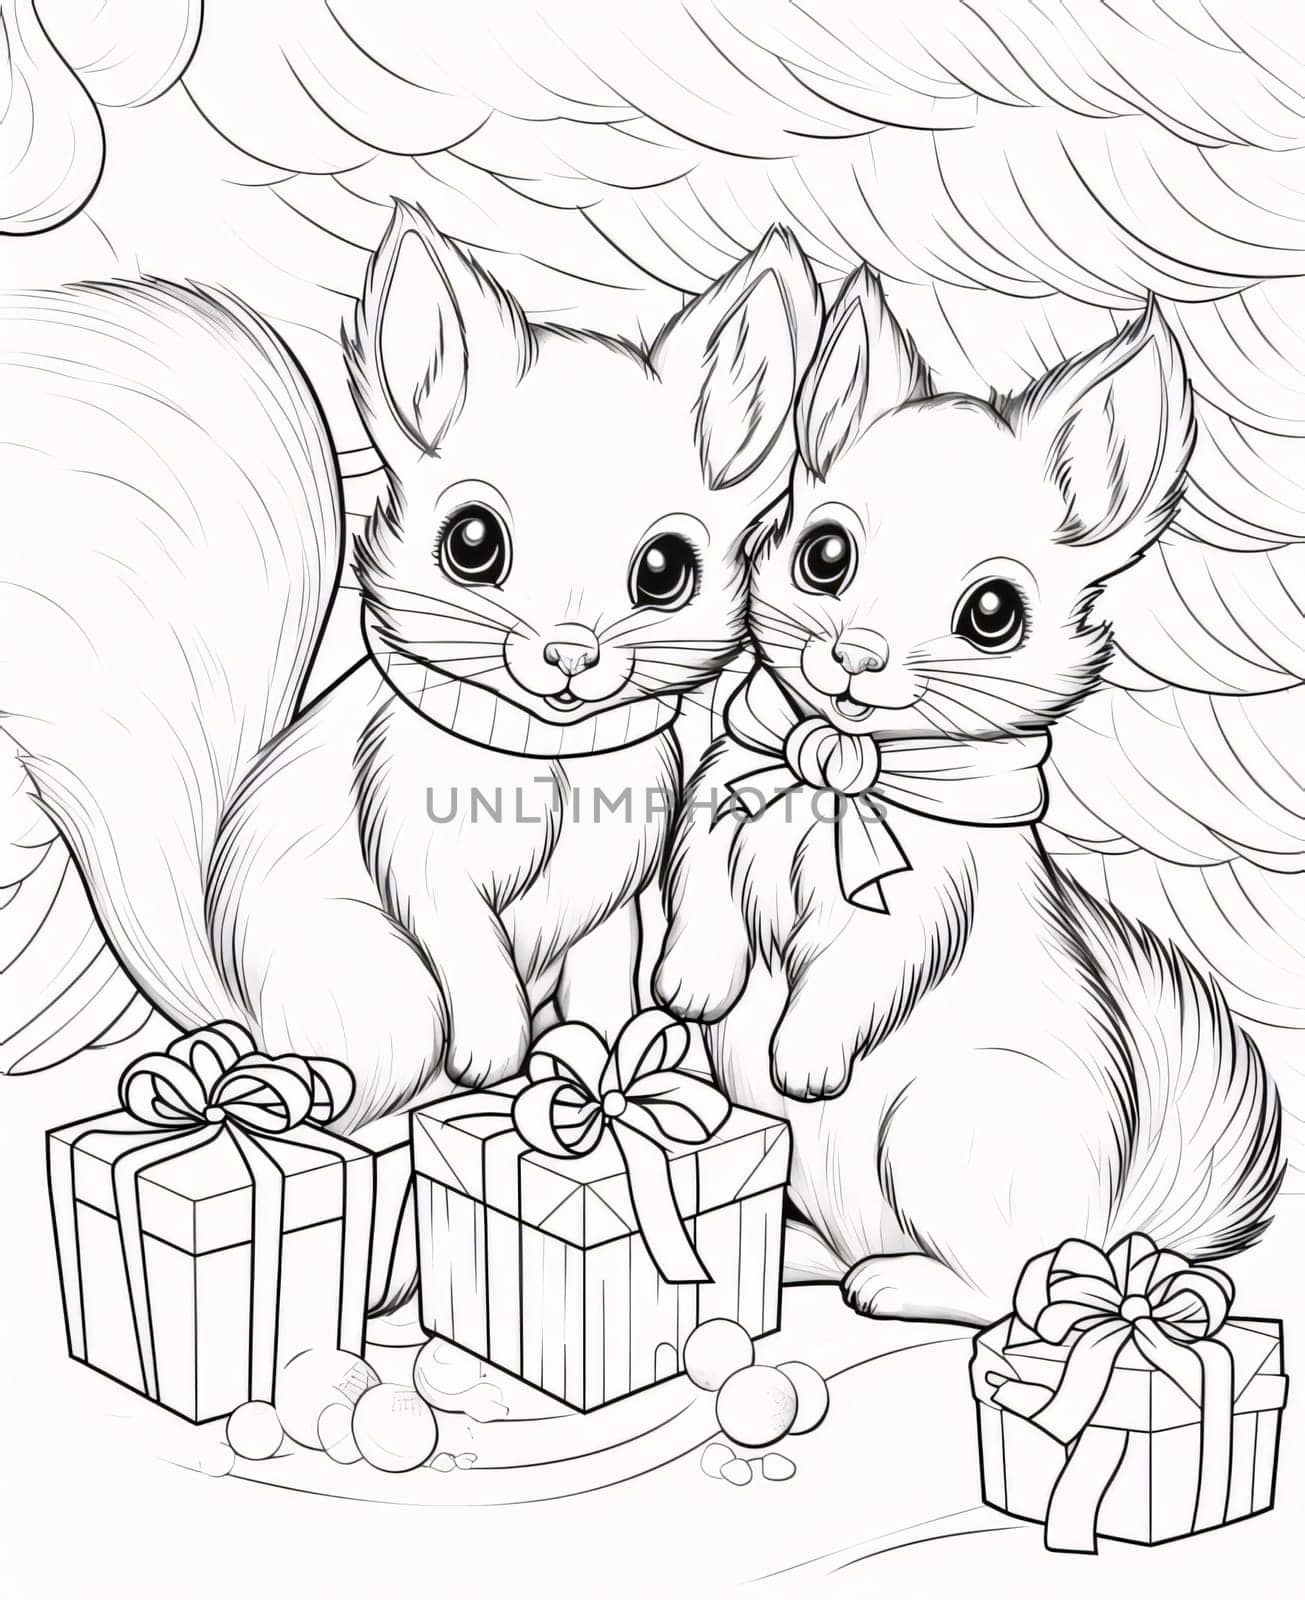 Black and white coloring card: two squirrels and gifts. Gifts as a day symbol of present and love. A time of falling in love and love.